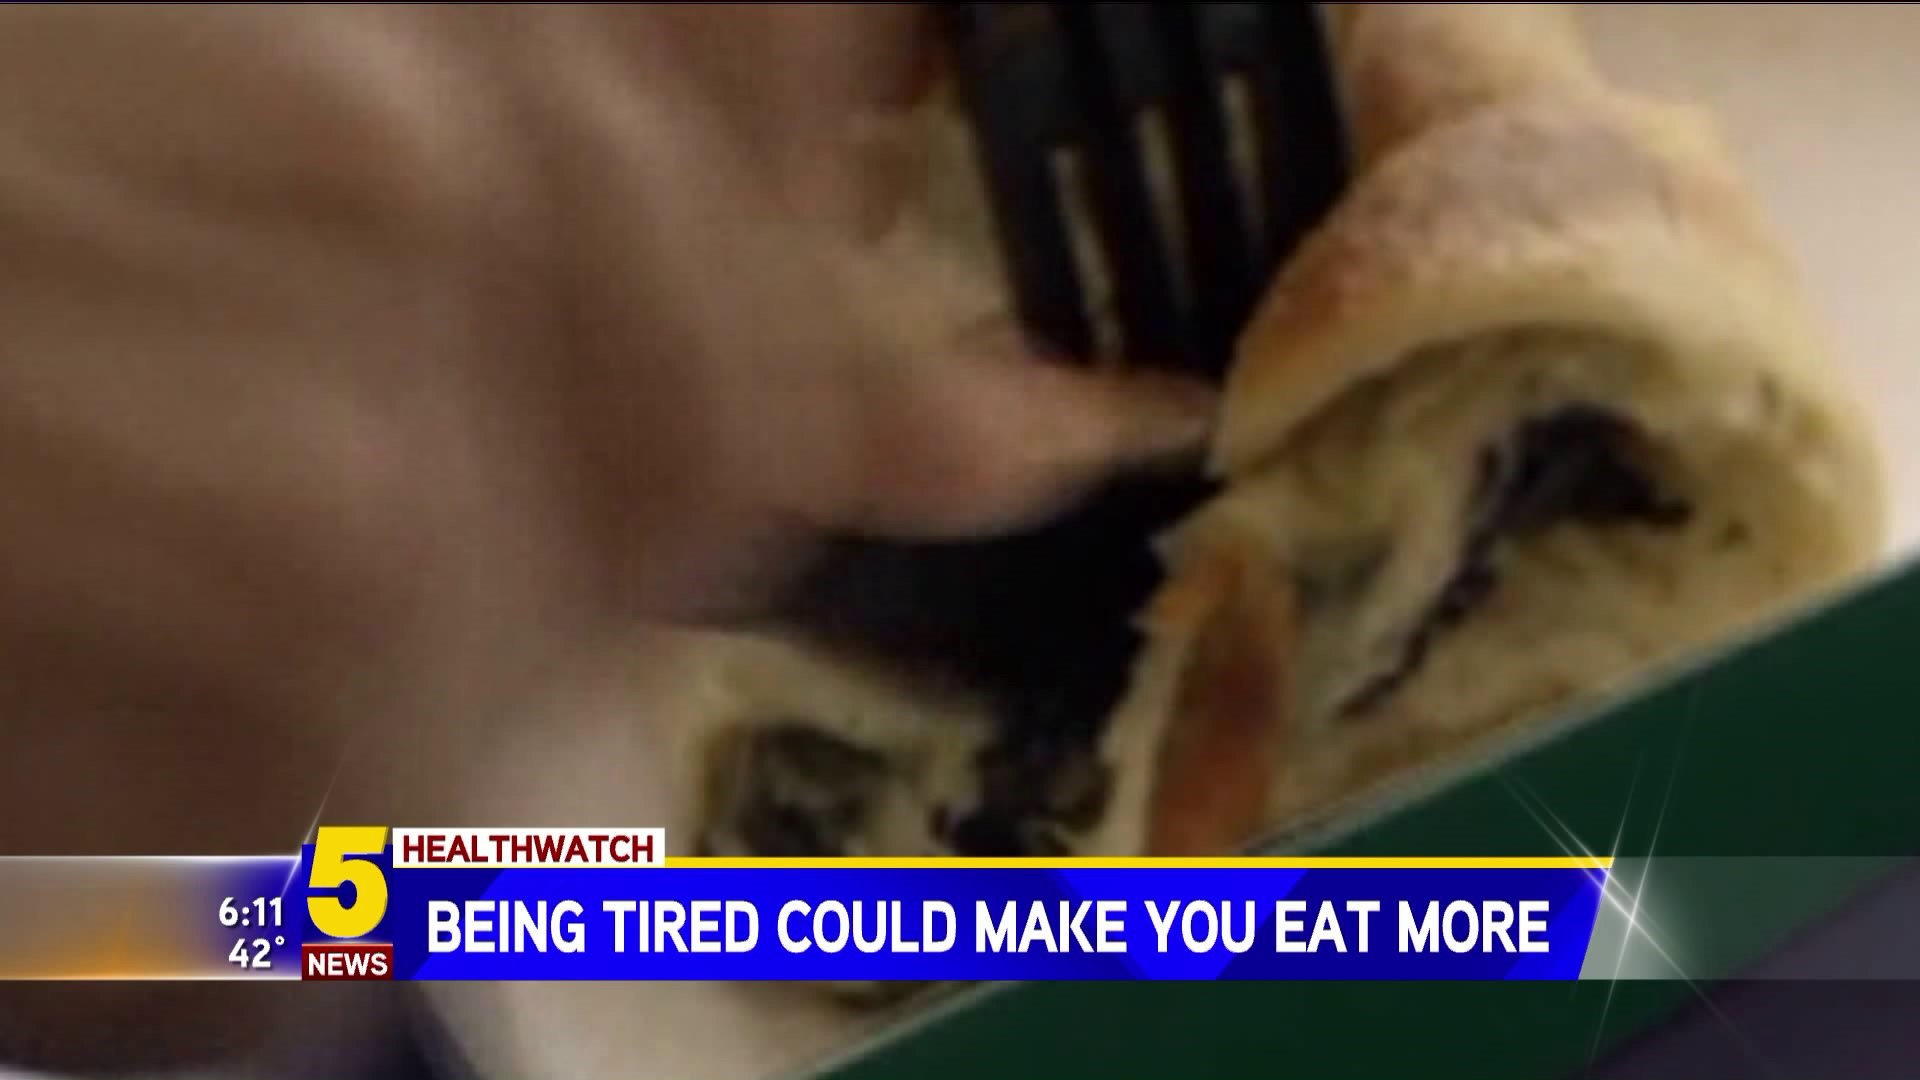 Being Tired Can Increase Food Cravings